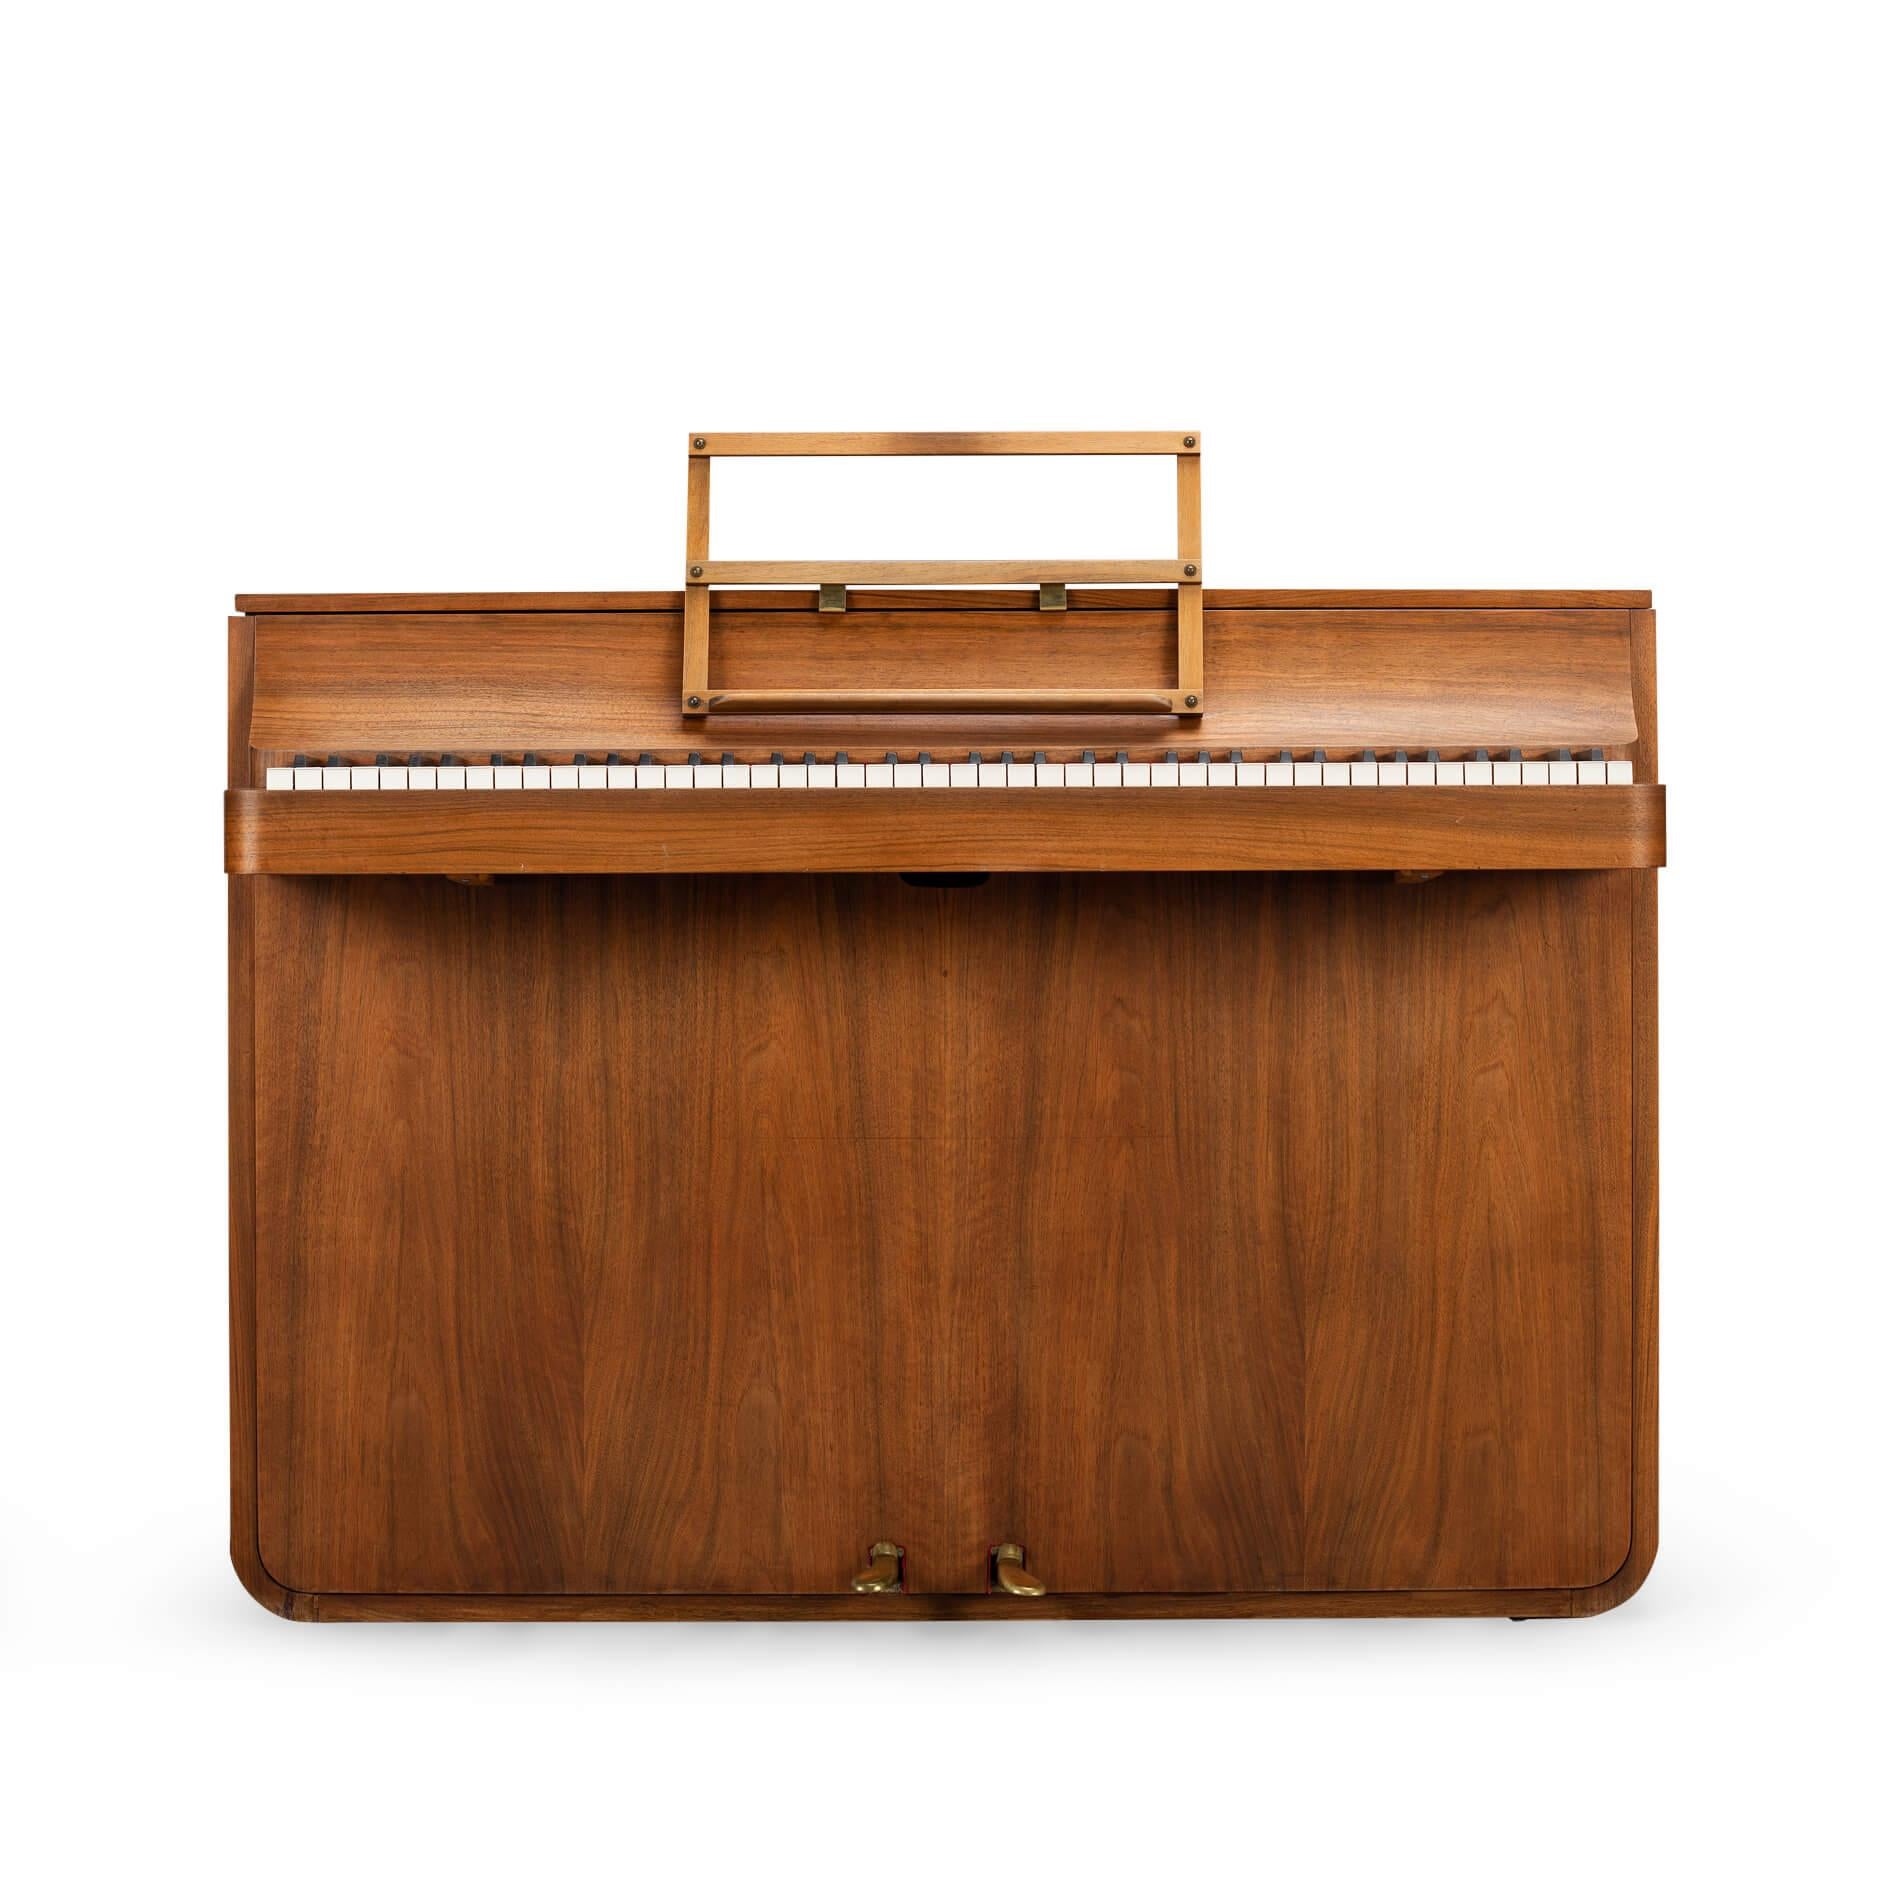 Danish design
A rare Danish midcentury pianette made of magnificent walnut. It is called pianette due to the 82 keys rather than the standard 88 of a full size piano. This pianette is made by renowned piano maker Louis Zwicki. Every piano from